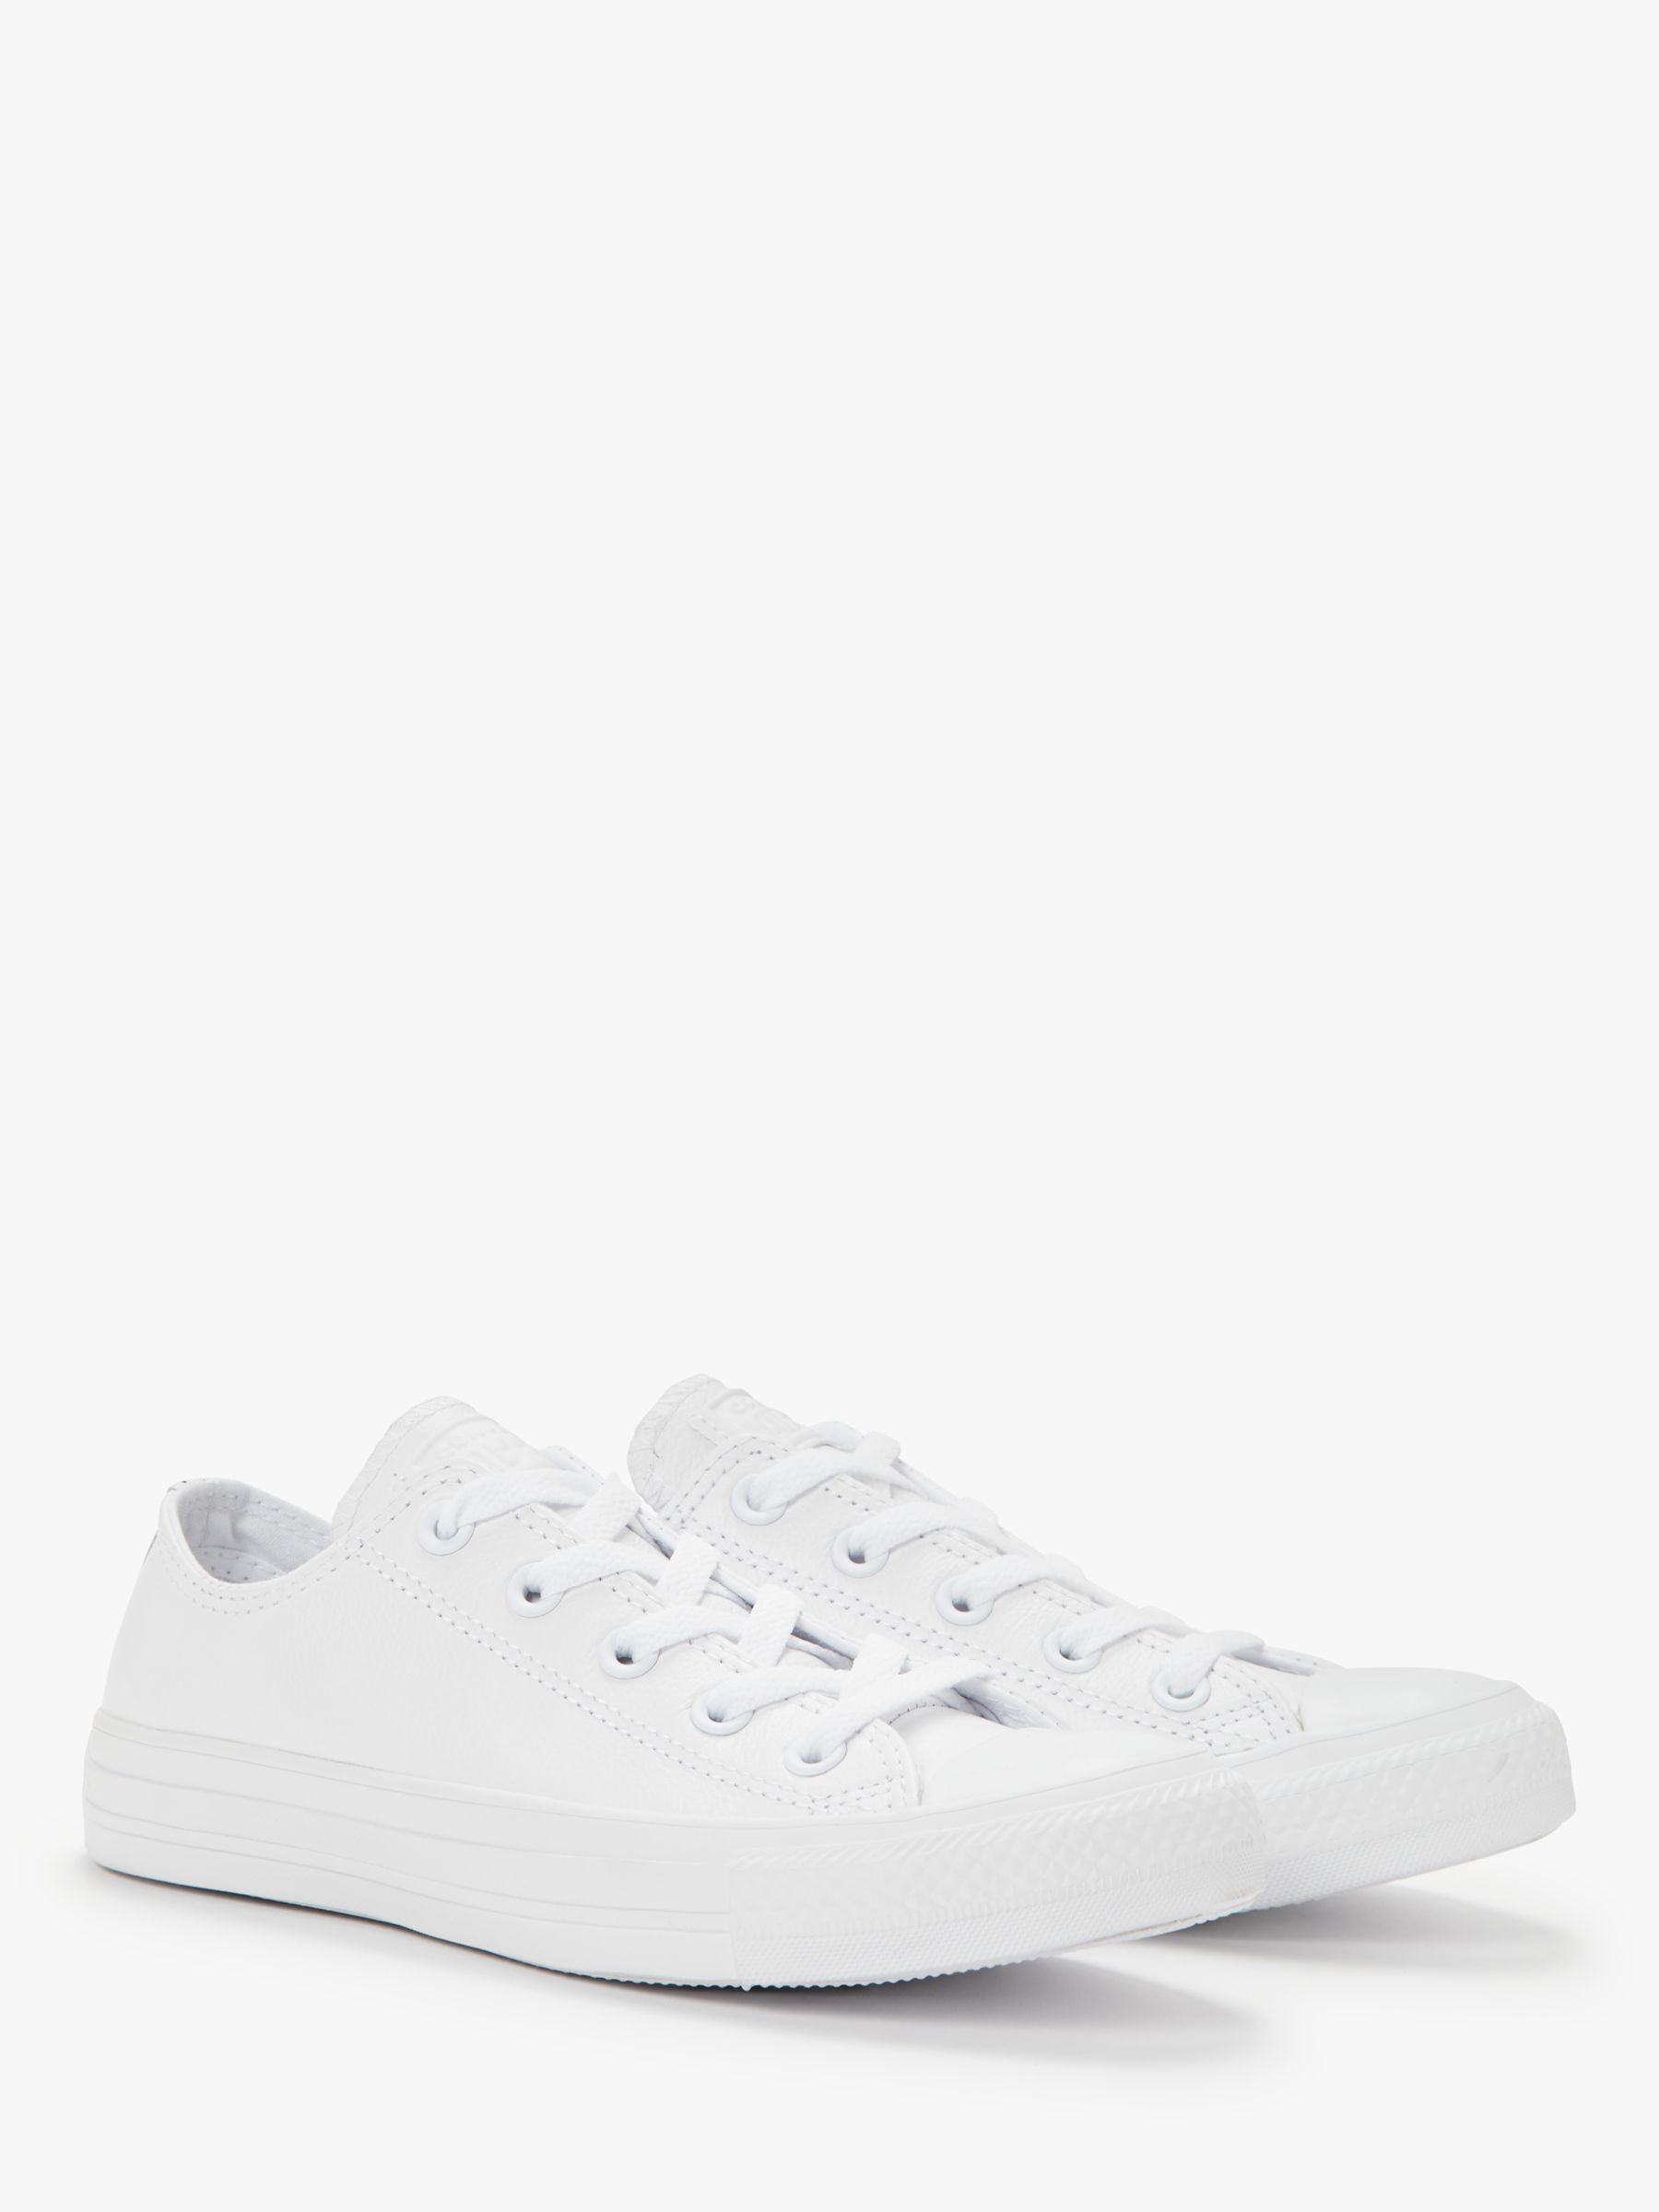 Converse Chuck Taylor All Star Ox Leather Trainers, White at John Lewis ...